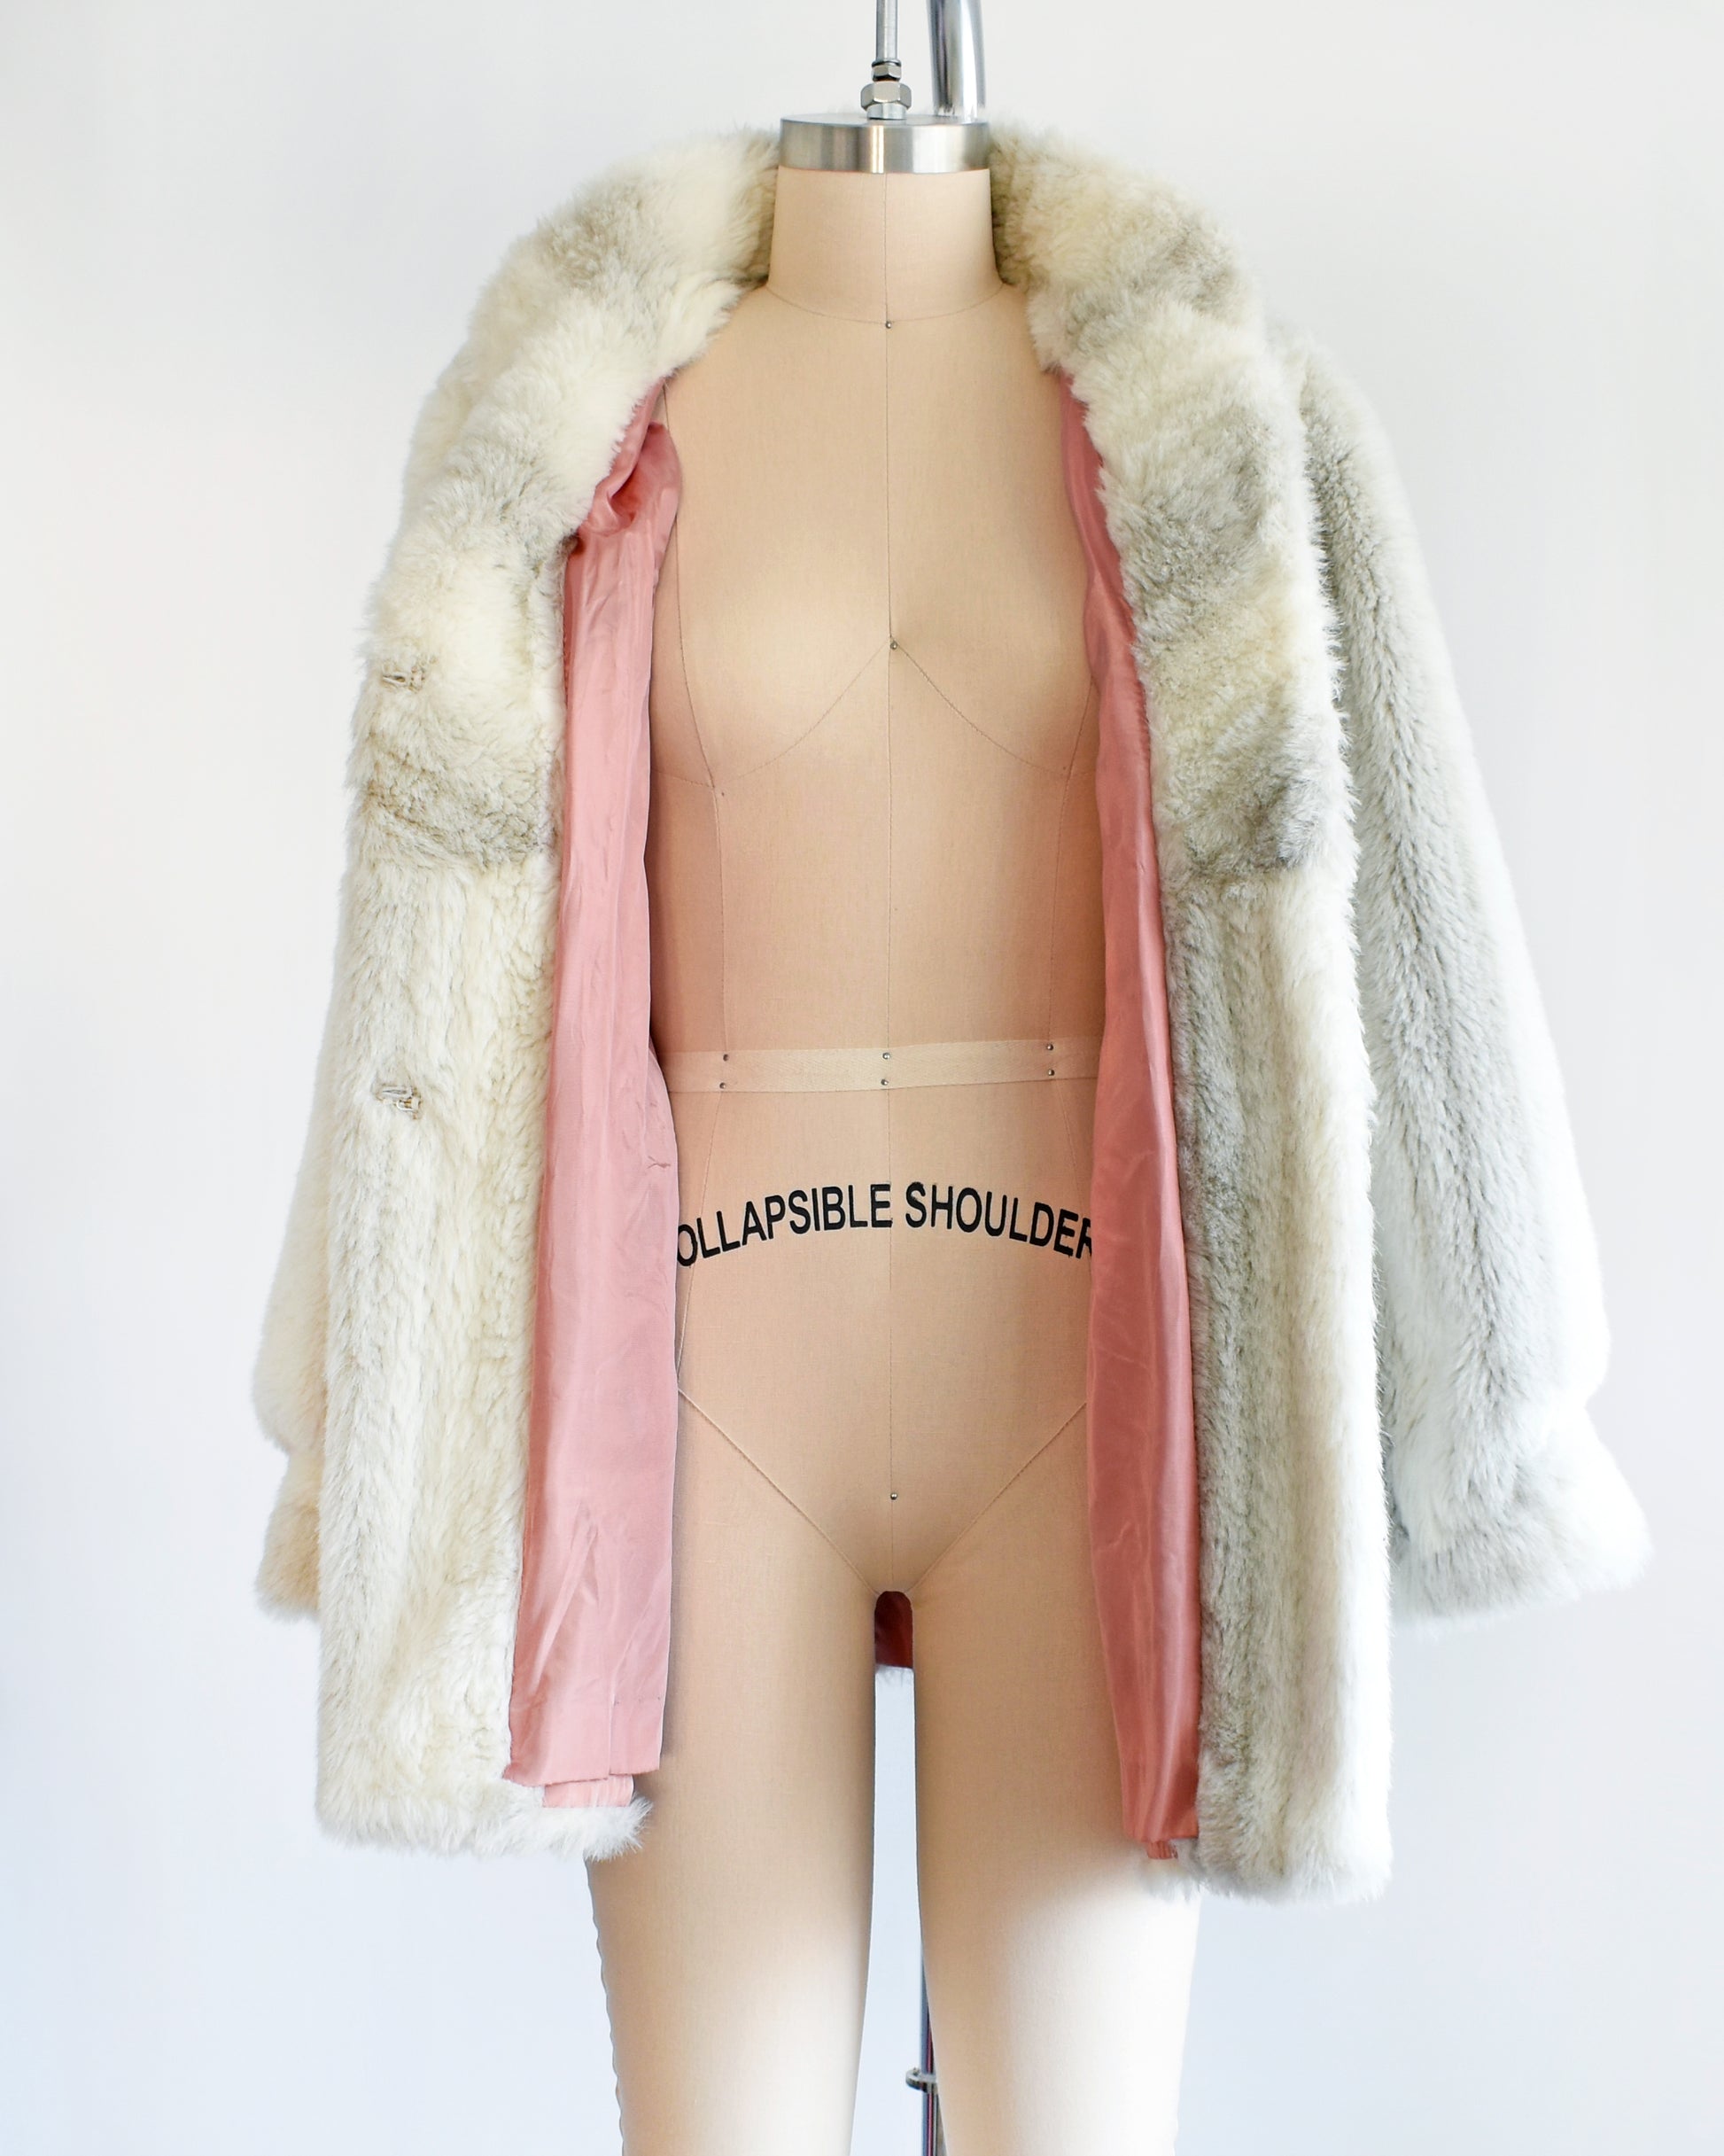 A vintage 70s/80s faux fur coat is made from a plush white faux fur with gray stripes, and features a stand-up collar with slightly puffed shoulders. The coat is opened revealing the salmon pink lining on the inside